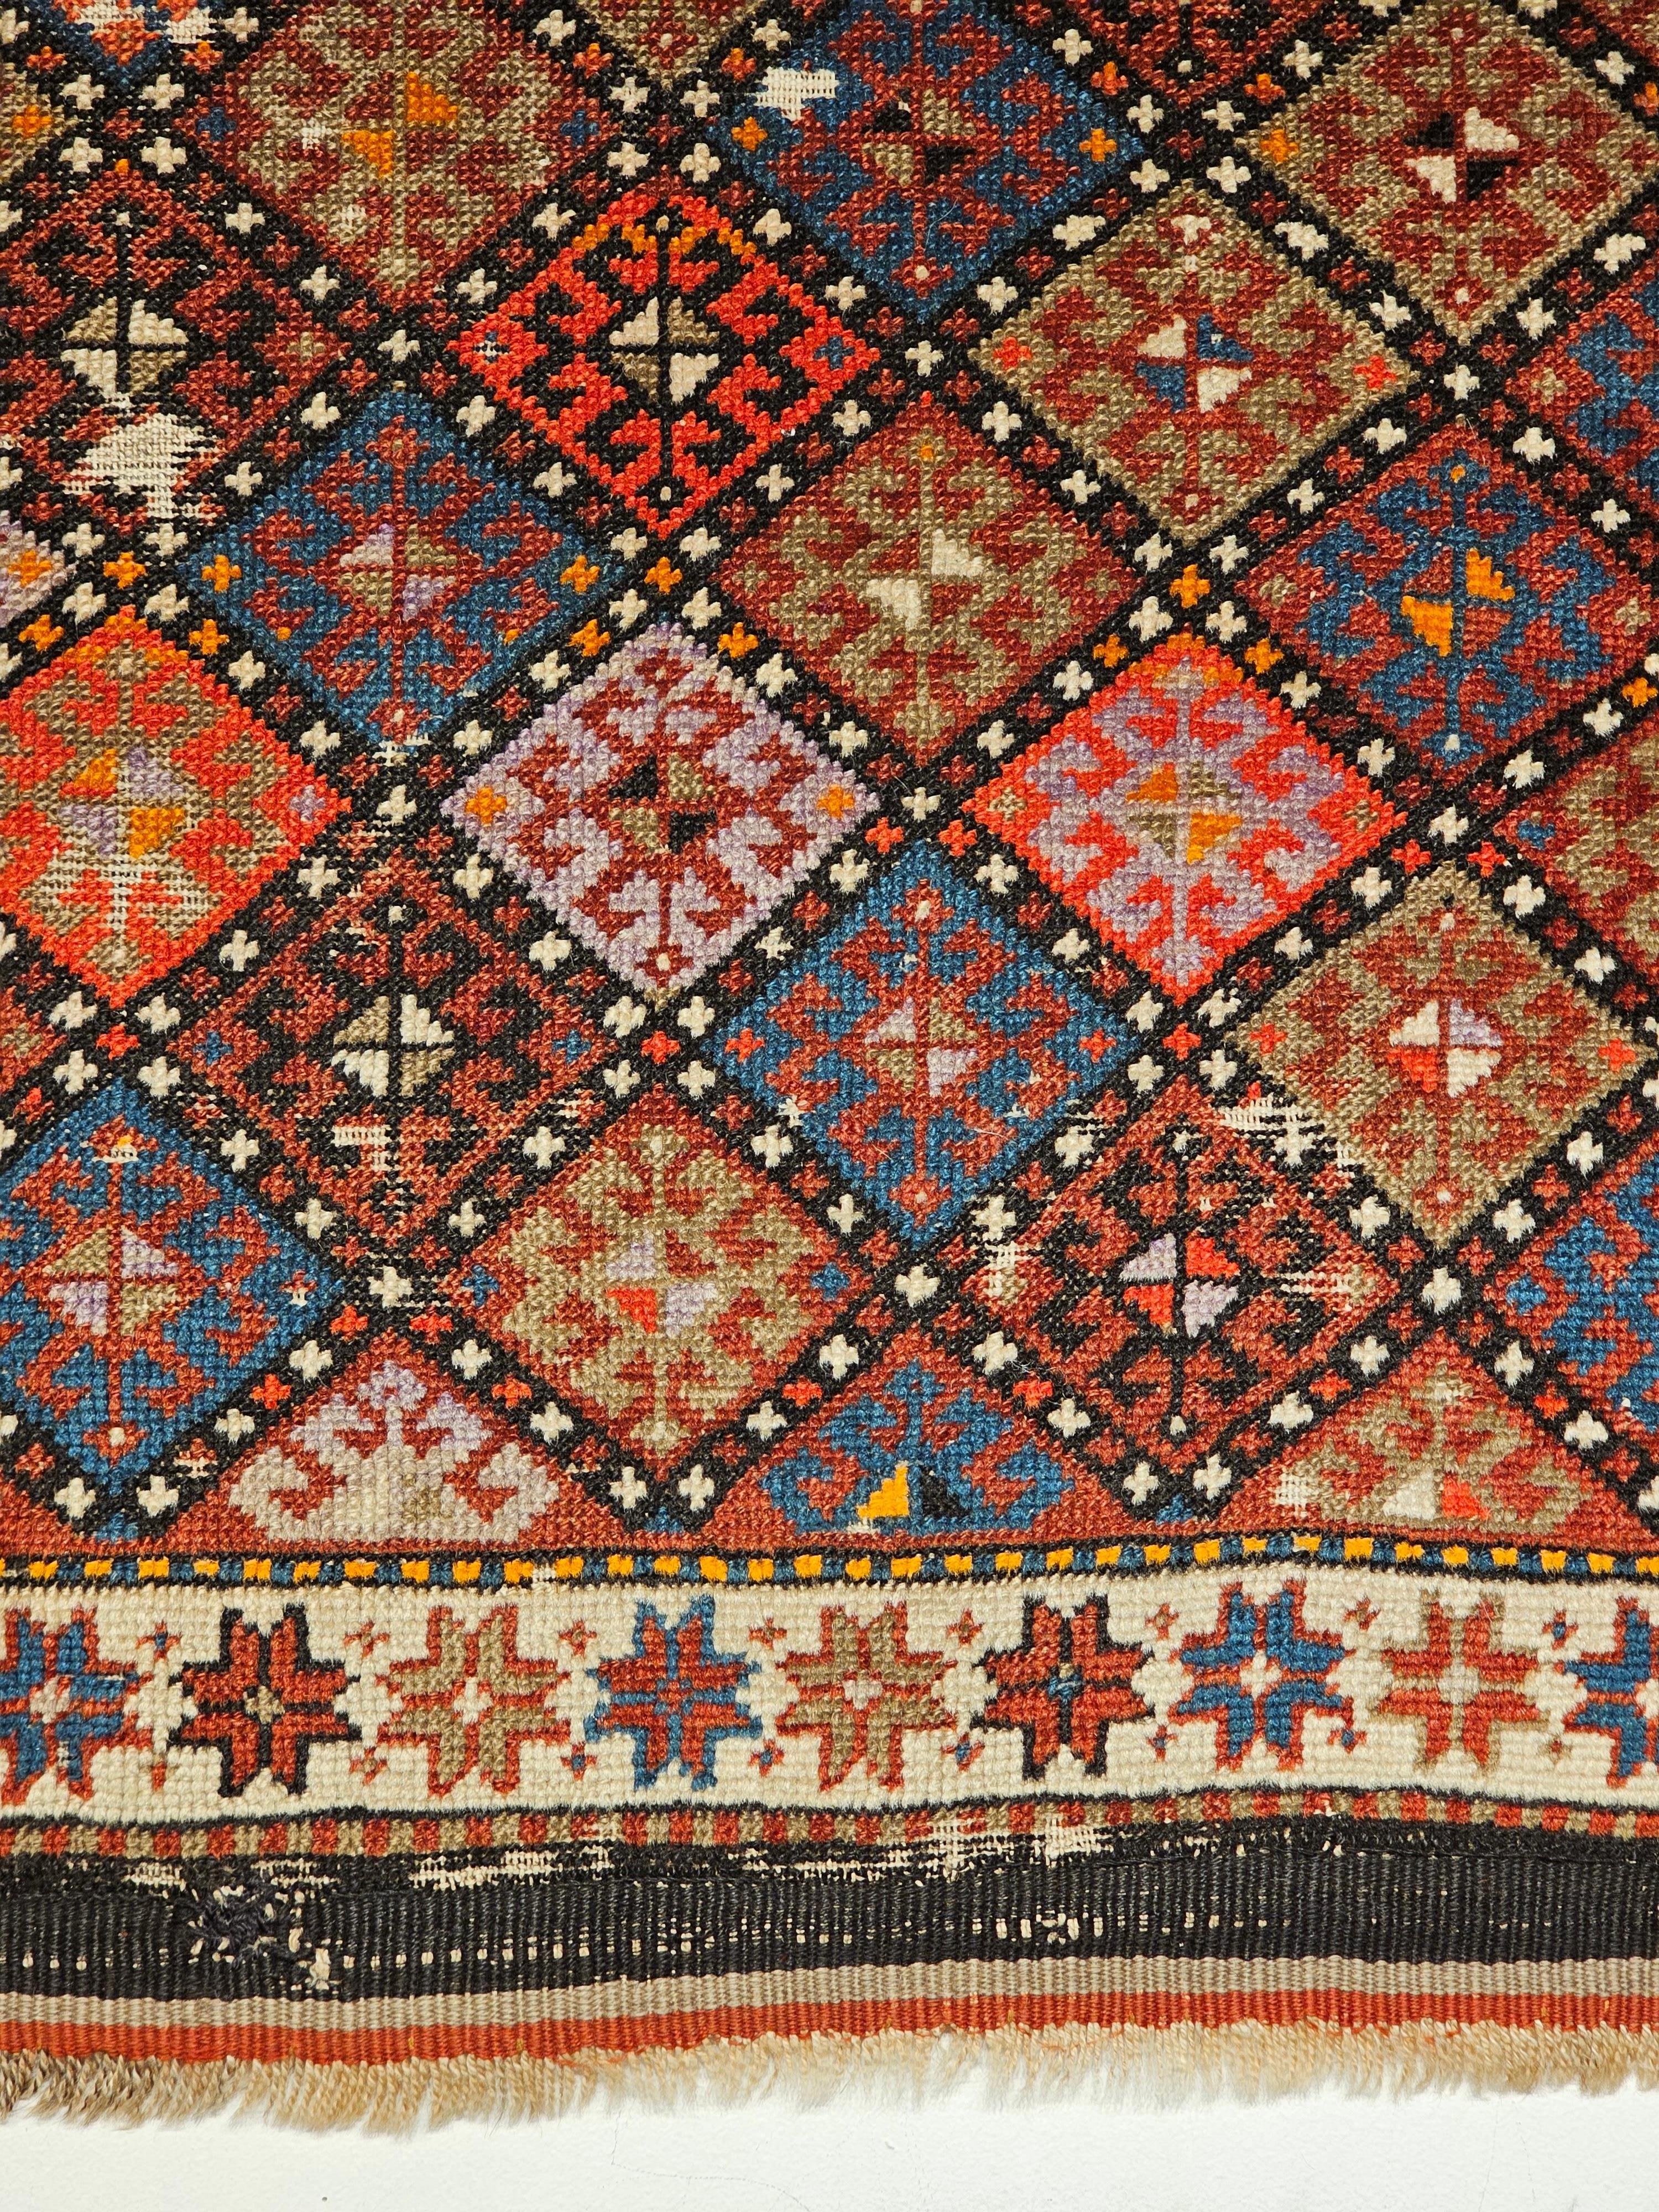 19th century Persian Kurdish Tribal Bagface in Multicolor Geometrical Design Used as Nomadic Wall Art. It could have been either the face of a saddlebag or the side panels for a mafrash (large bag). It has kilim weaving and the soumak woven designs